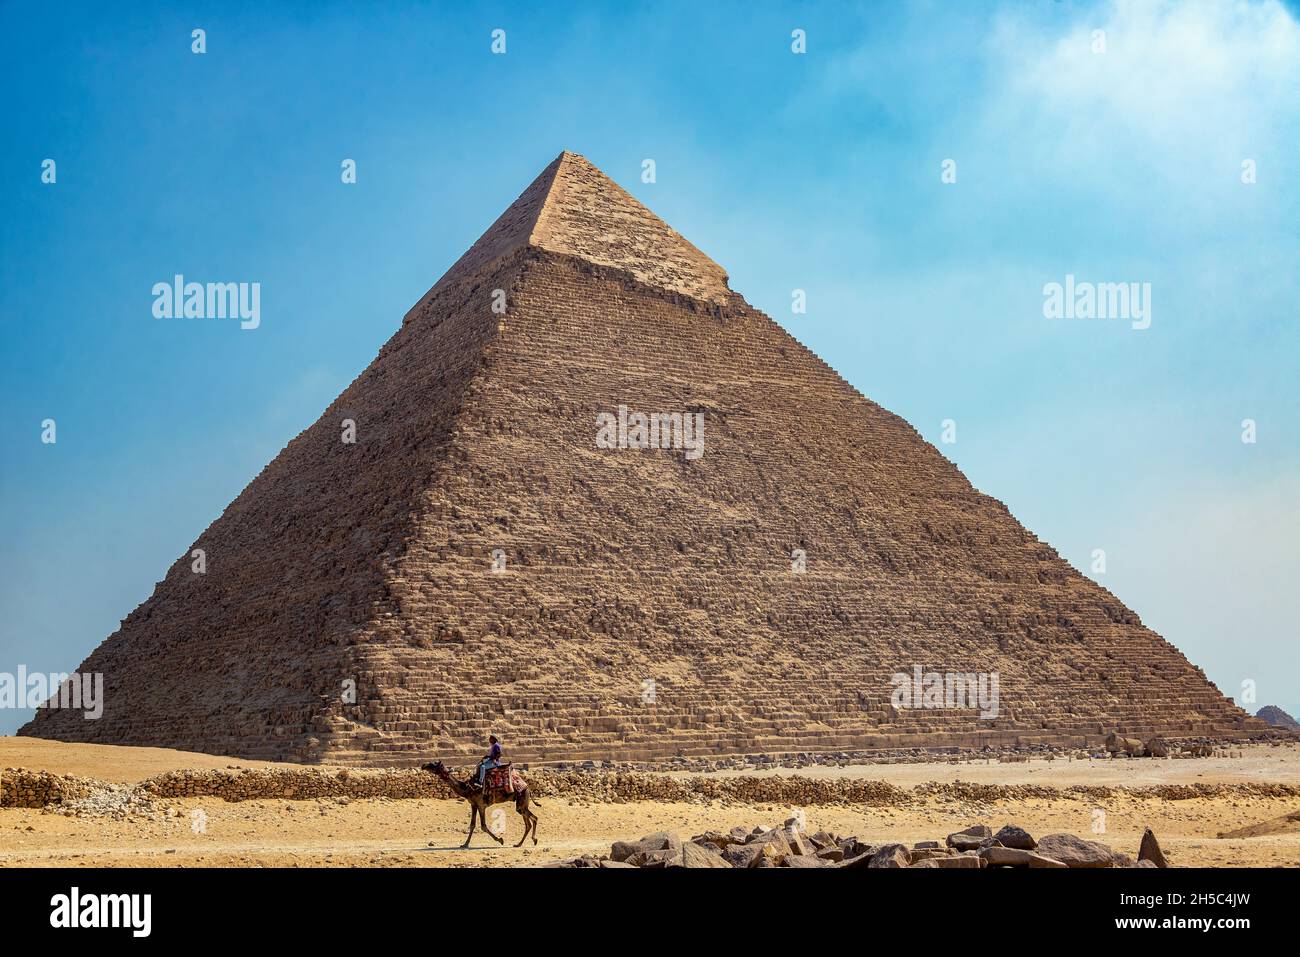 GIZA, EGYPT - JULY 14, 2021: A person rides a camel near the Great Pyramid in Giza, Egypt Stock Photo